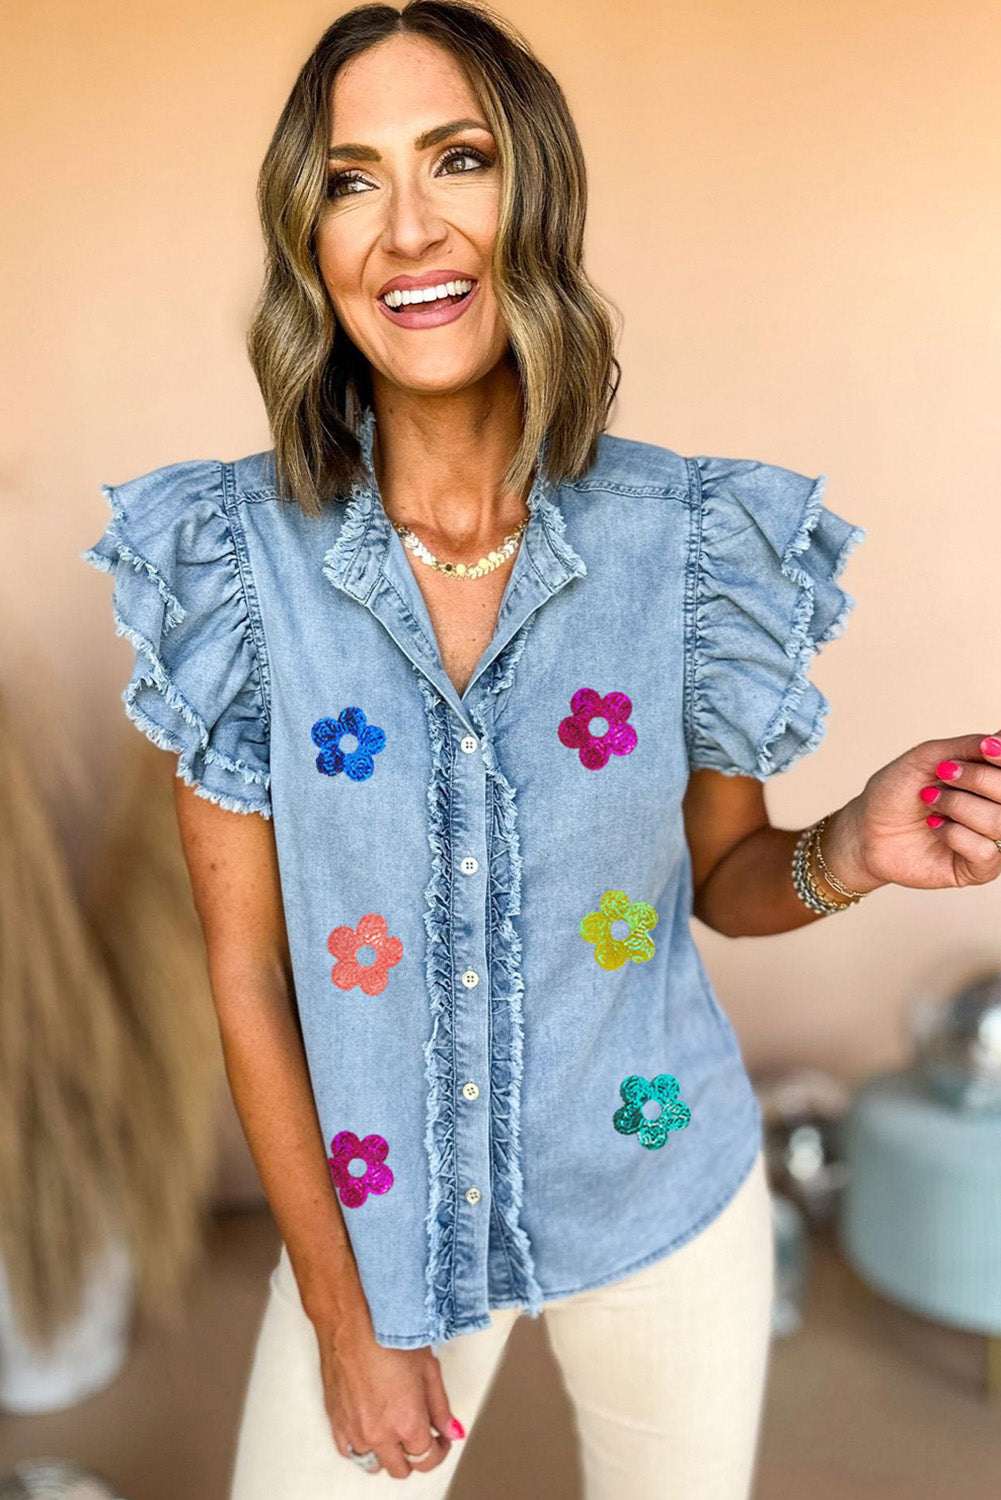 Beau Blue Sequin Flower Graphic Ruffled Sleeve Frayed Denim Top Graphic Tees JT's Designer Fashion